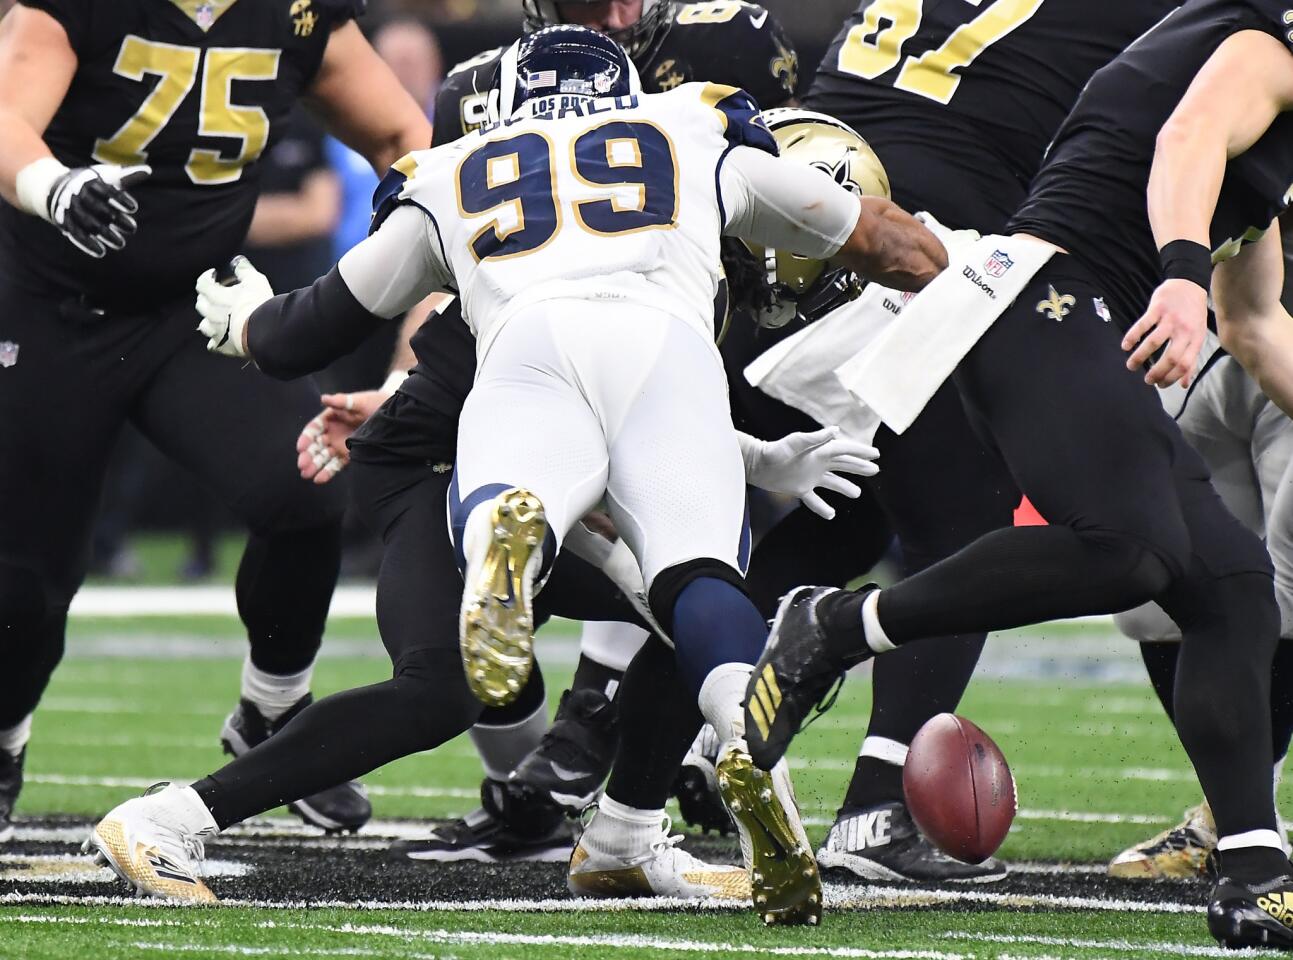 Rams defensive end Aaron Donald strips the ball of New Orleans Saints running back Alvin Kamara in the third quarter in the NFC Championship at the Superdome in New Orleans Sunday. Kamara recovered the ball.